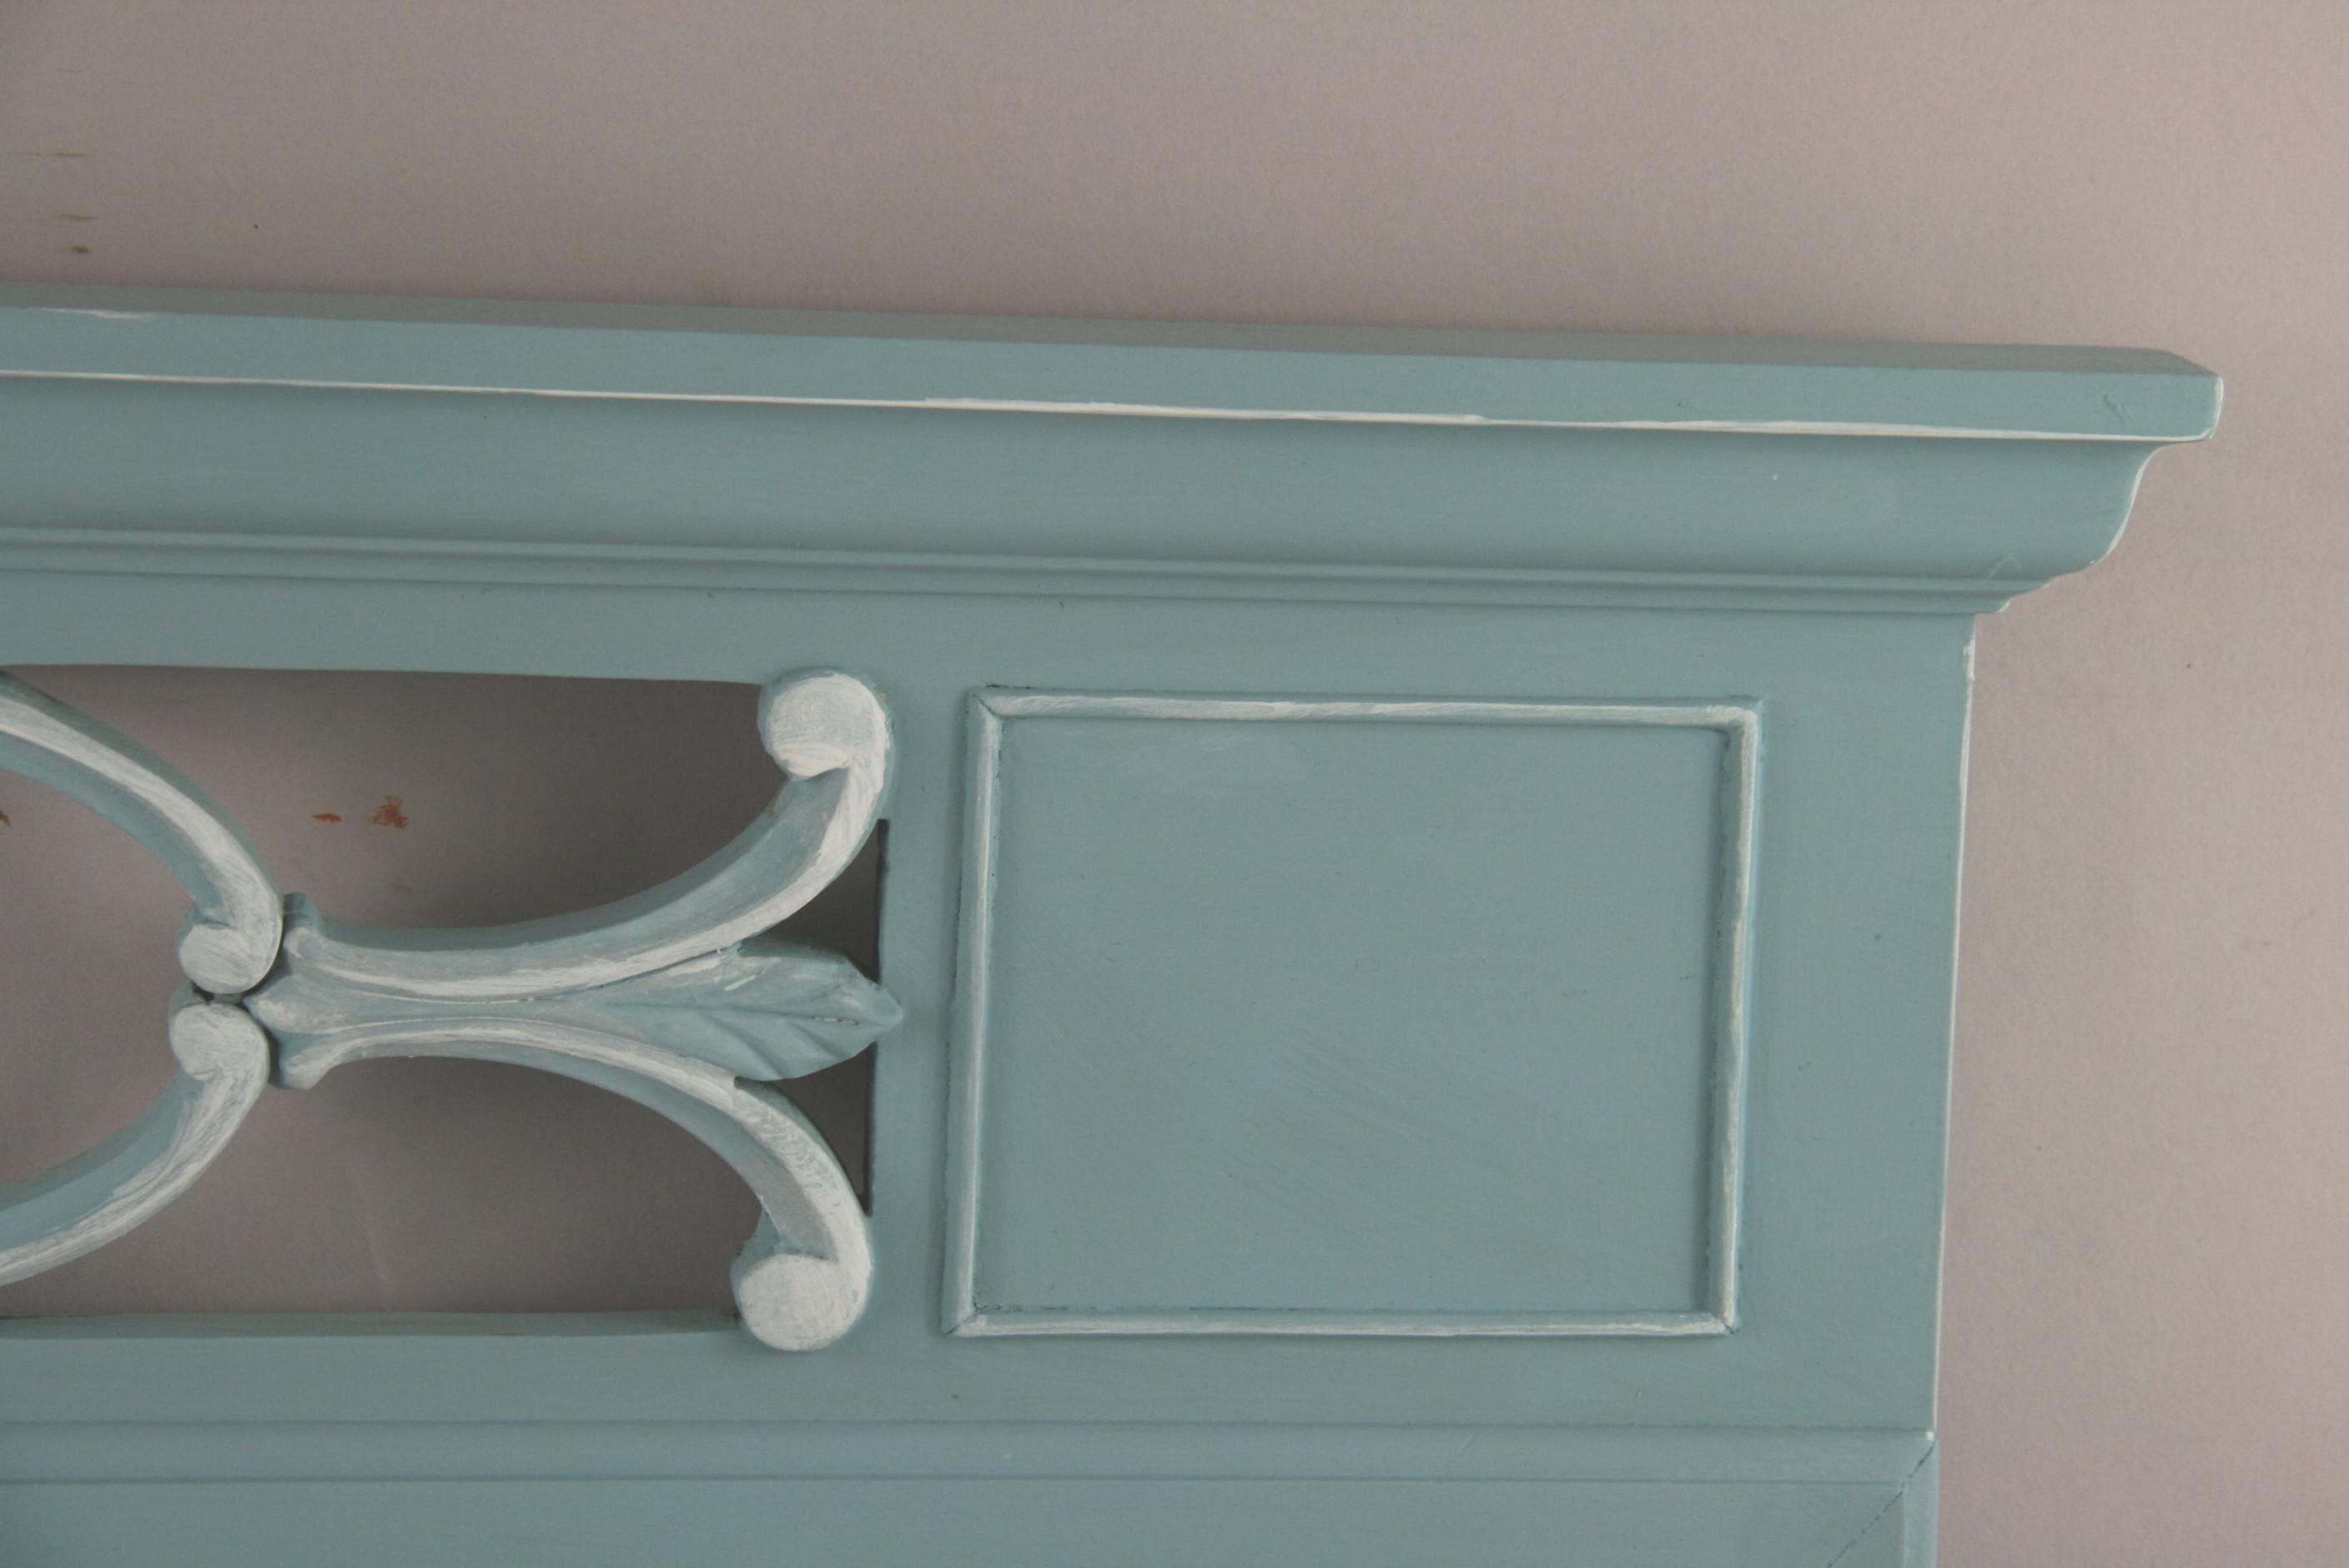 1-4072 neoclassical style antique  mirror hand painted in a French  pale blue
with white detailing.